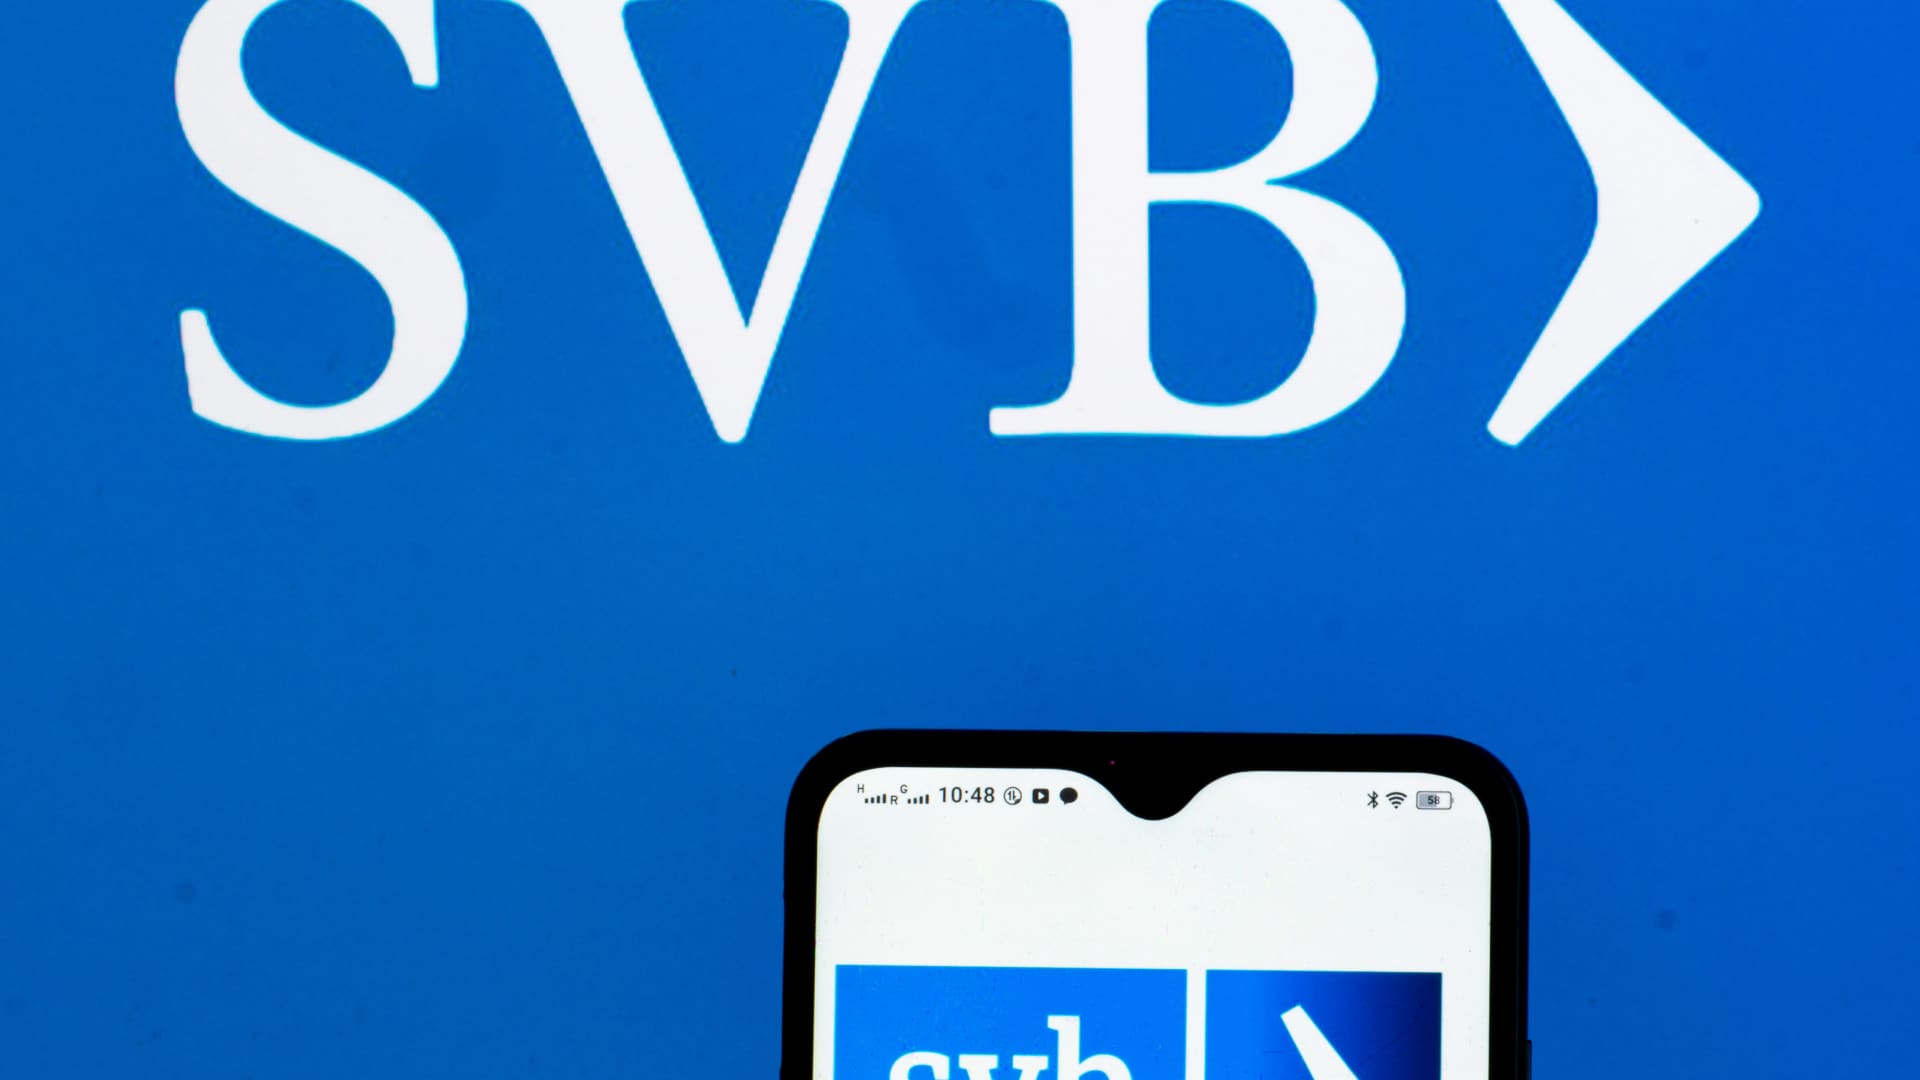 Shares of SVB Financial fall 60% as tech-focused bank looks to raise more cash